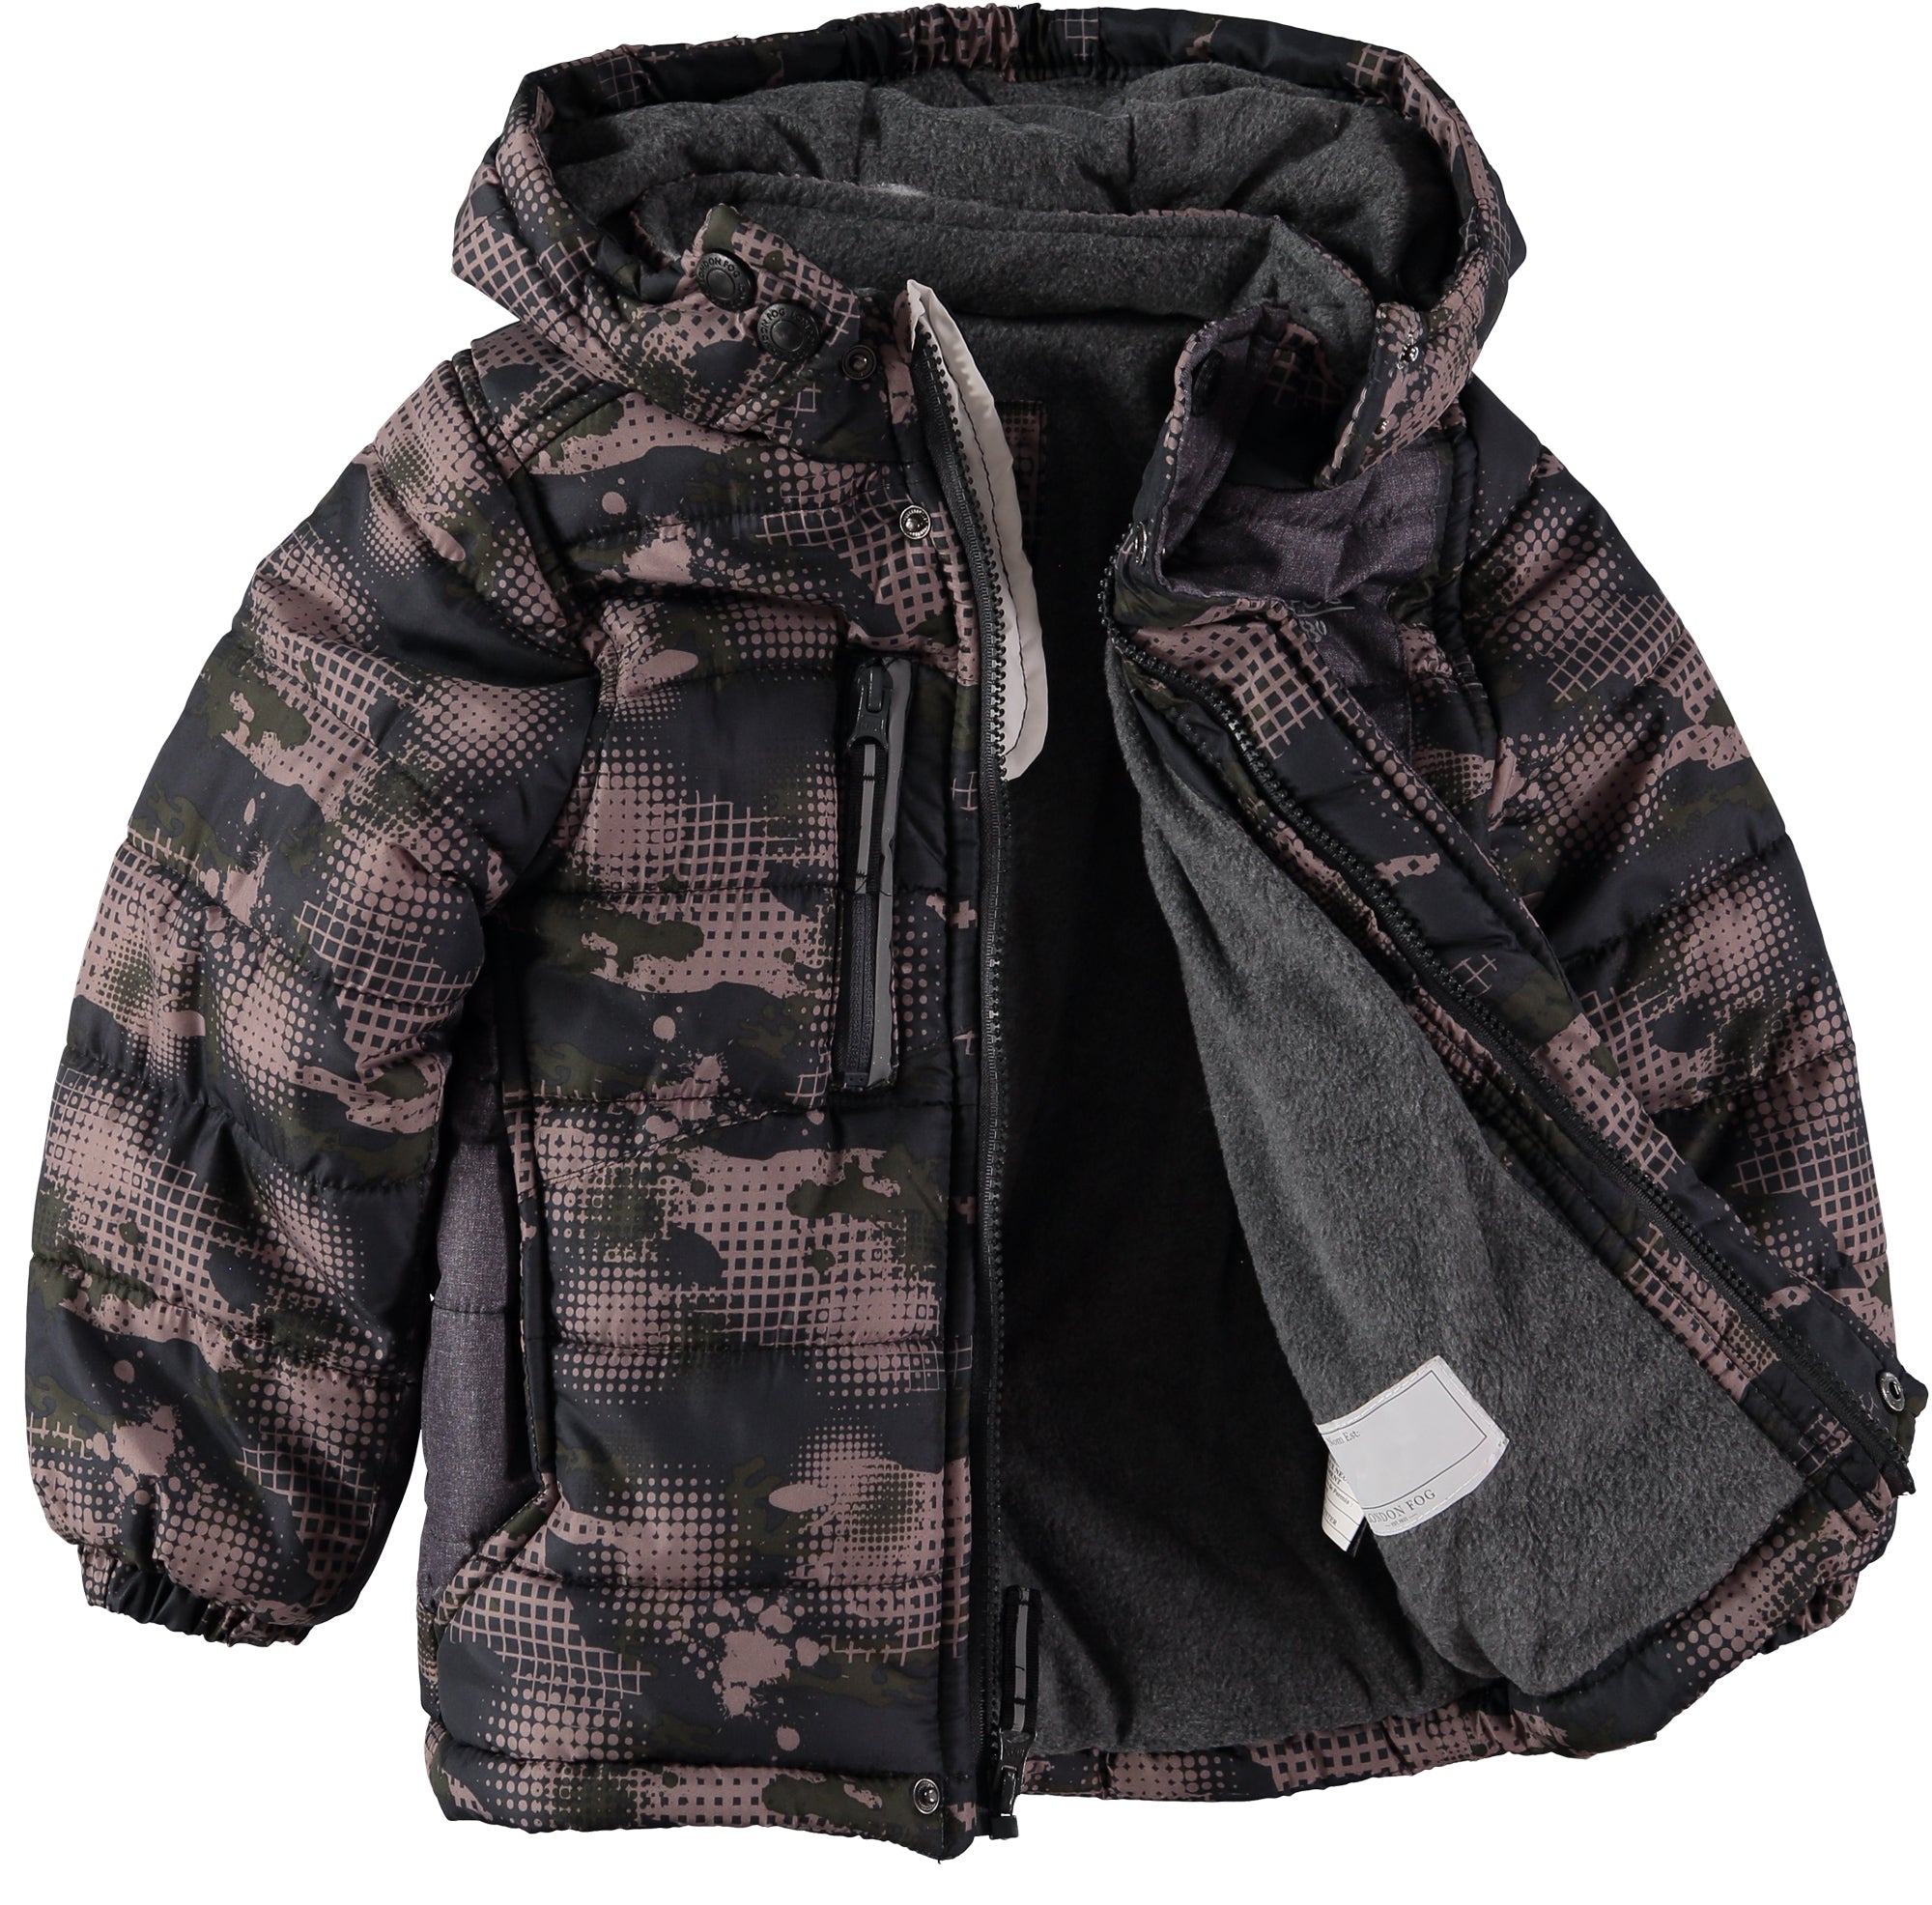 London Fog Boys 8-20 Panel Puffer Jacket with Hat